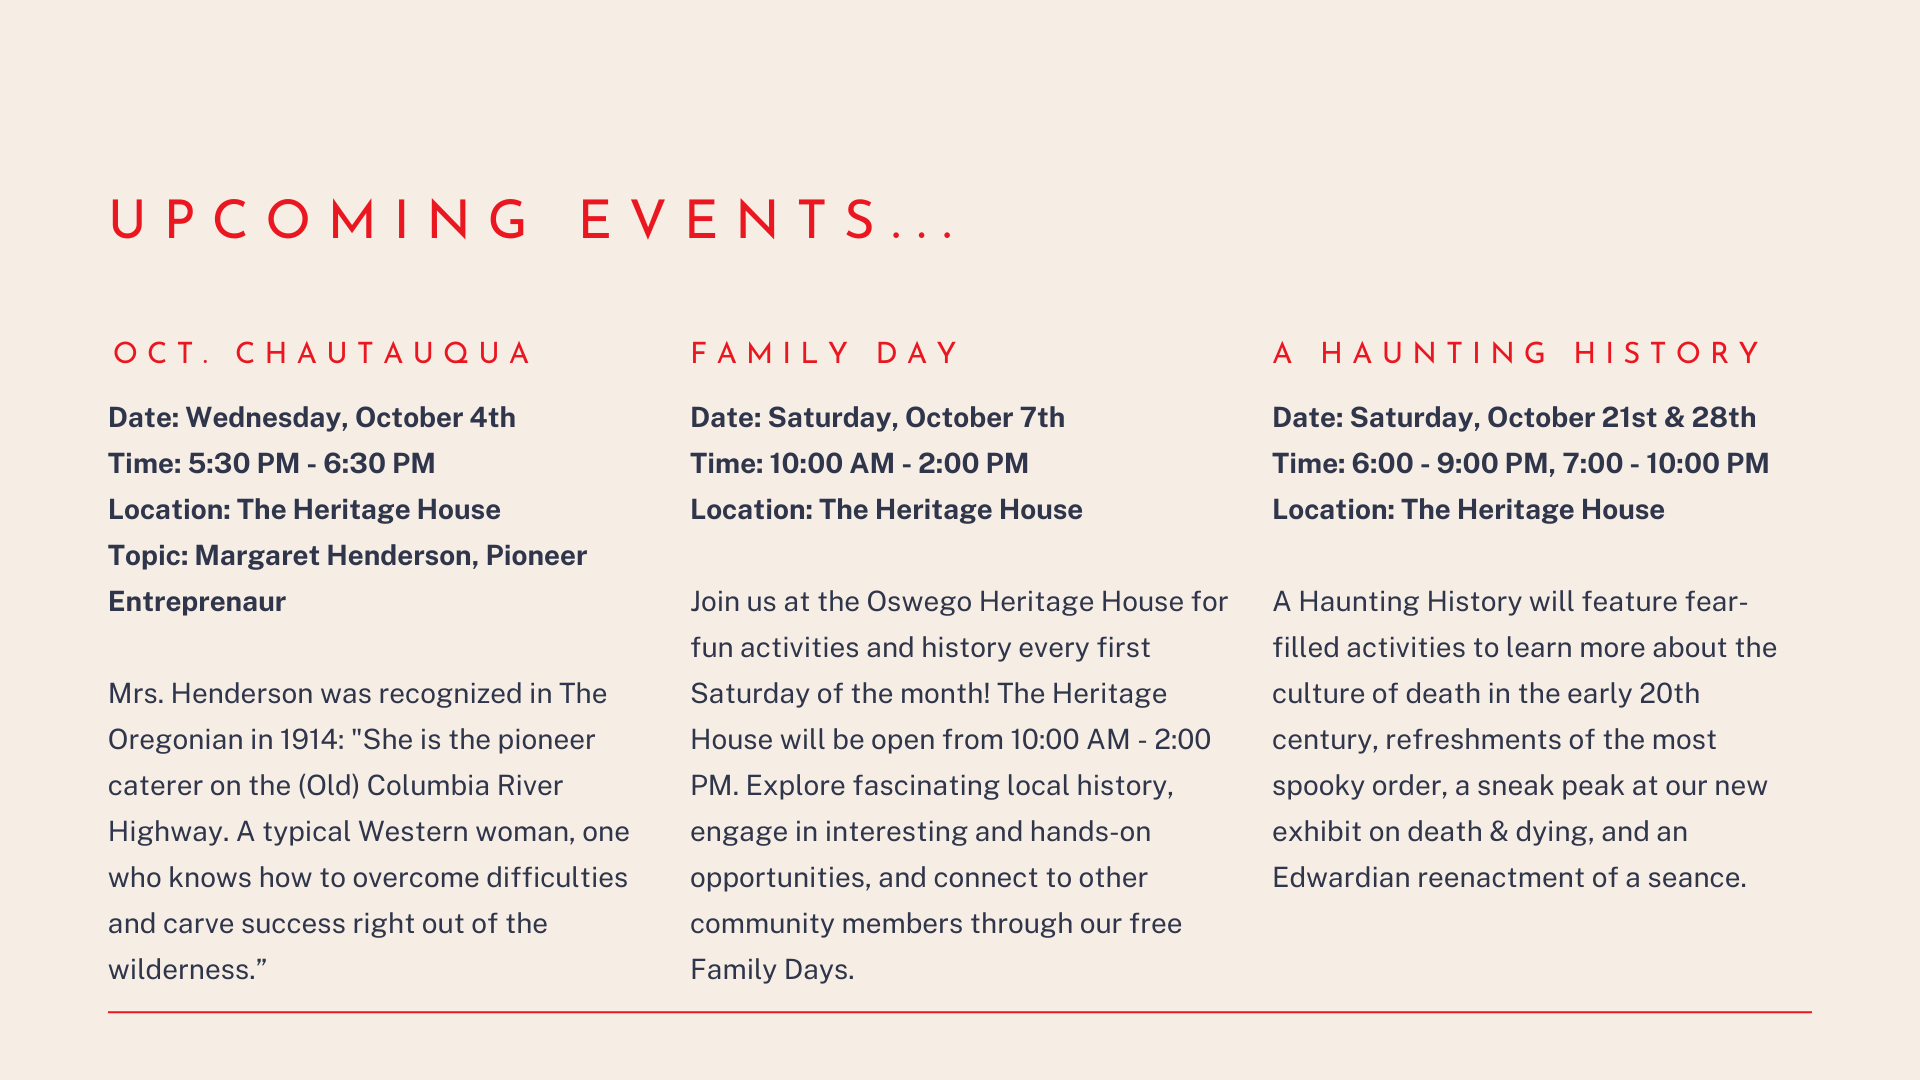 Upcoming events include: October Chautauqua on Wednesday, October 4th at the Heritage House about Margaret Henderson, pioneer entreprenaur. Family Day on Saturday, October 7th from 10:00 AM - 2:00 PM at the Heritage House. A Haunting History on Saturday, October 21st & 28th at the Heritage House. Descriptions of events included.